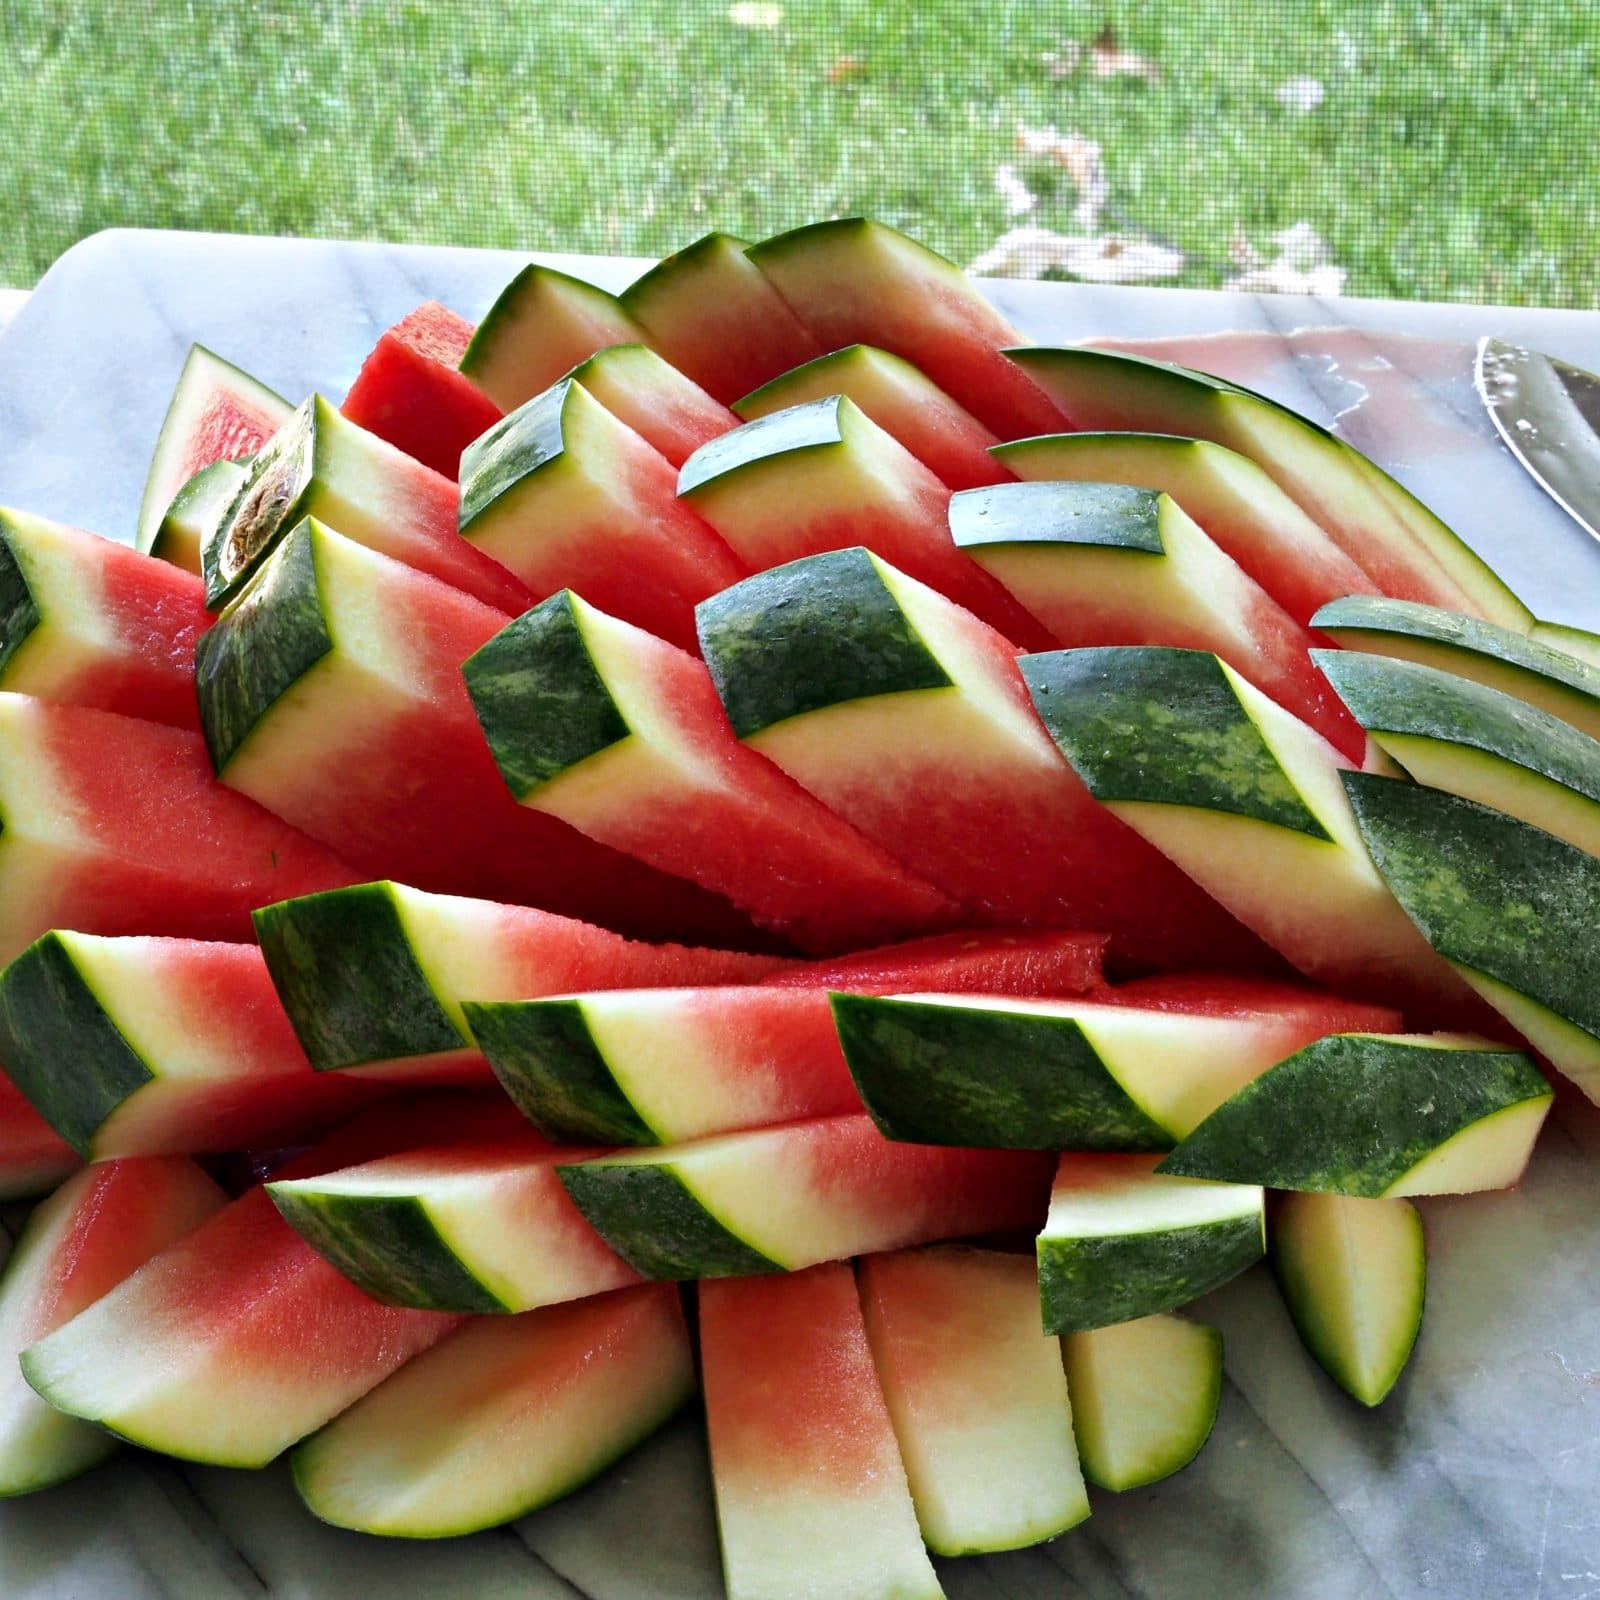 How-to-Cut Watermelon Sticks. Follow this easy four-step process for cutting watermelon sticks then serve them at an elegant dinner party or backyard barbecue.